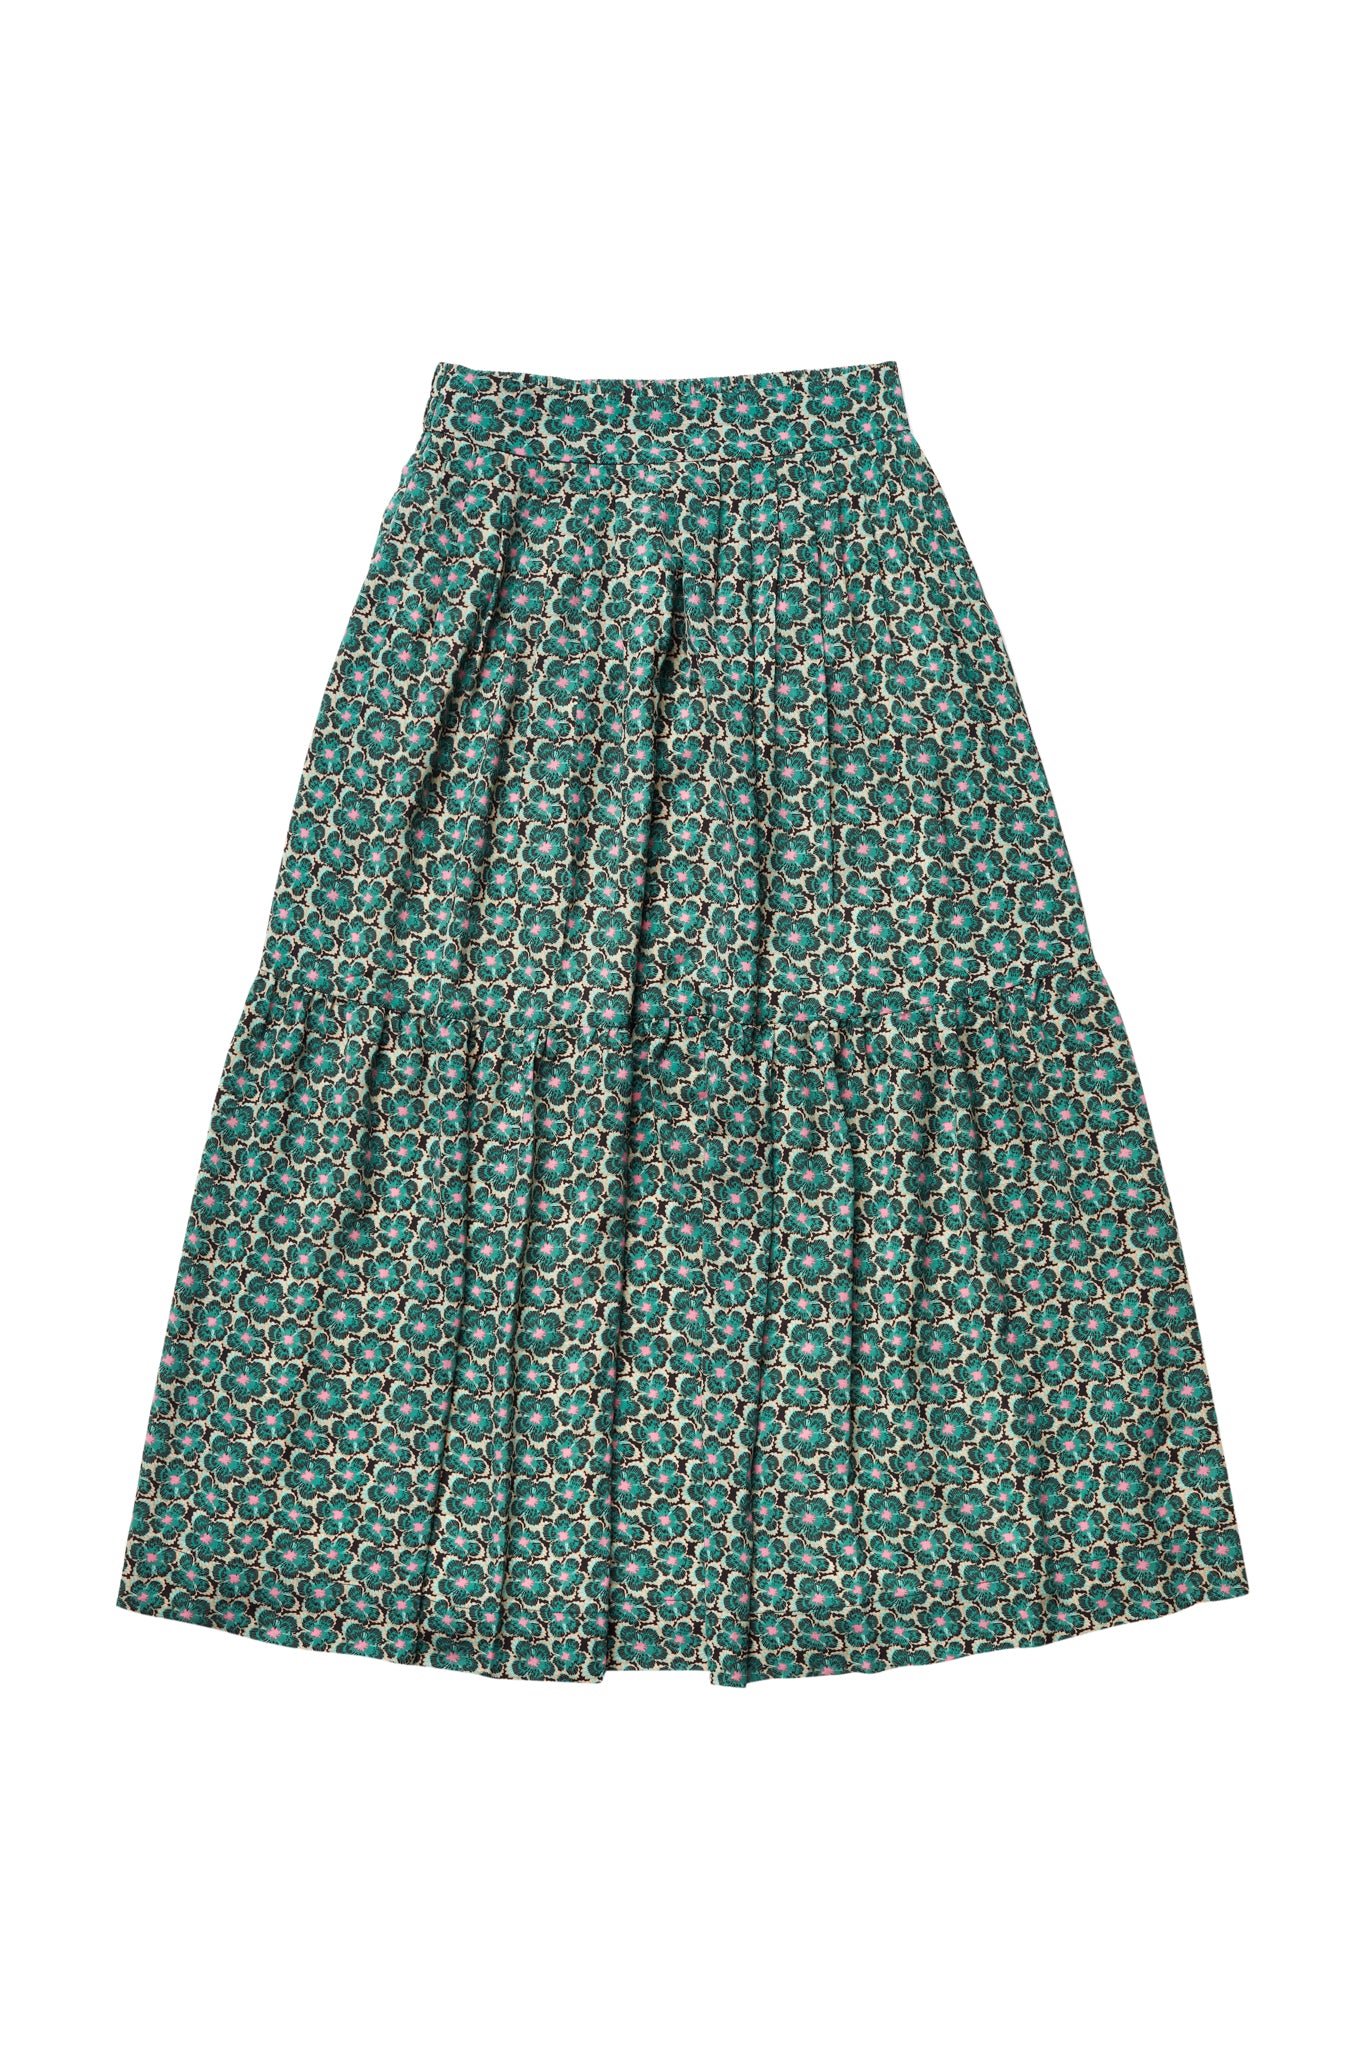 Isabella Skirt in Print on Green #7952 FINAL SALE